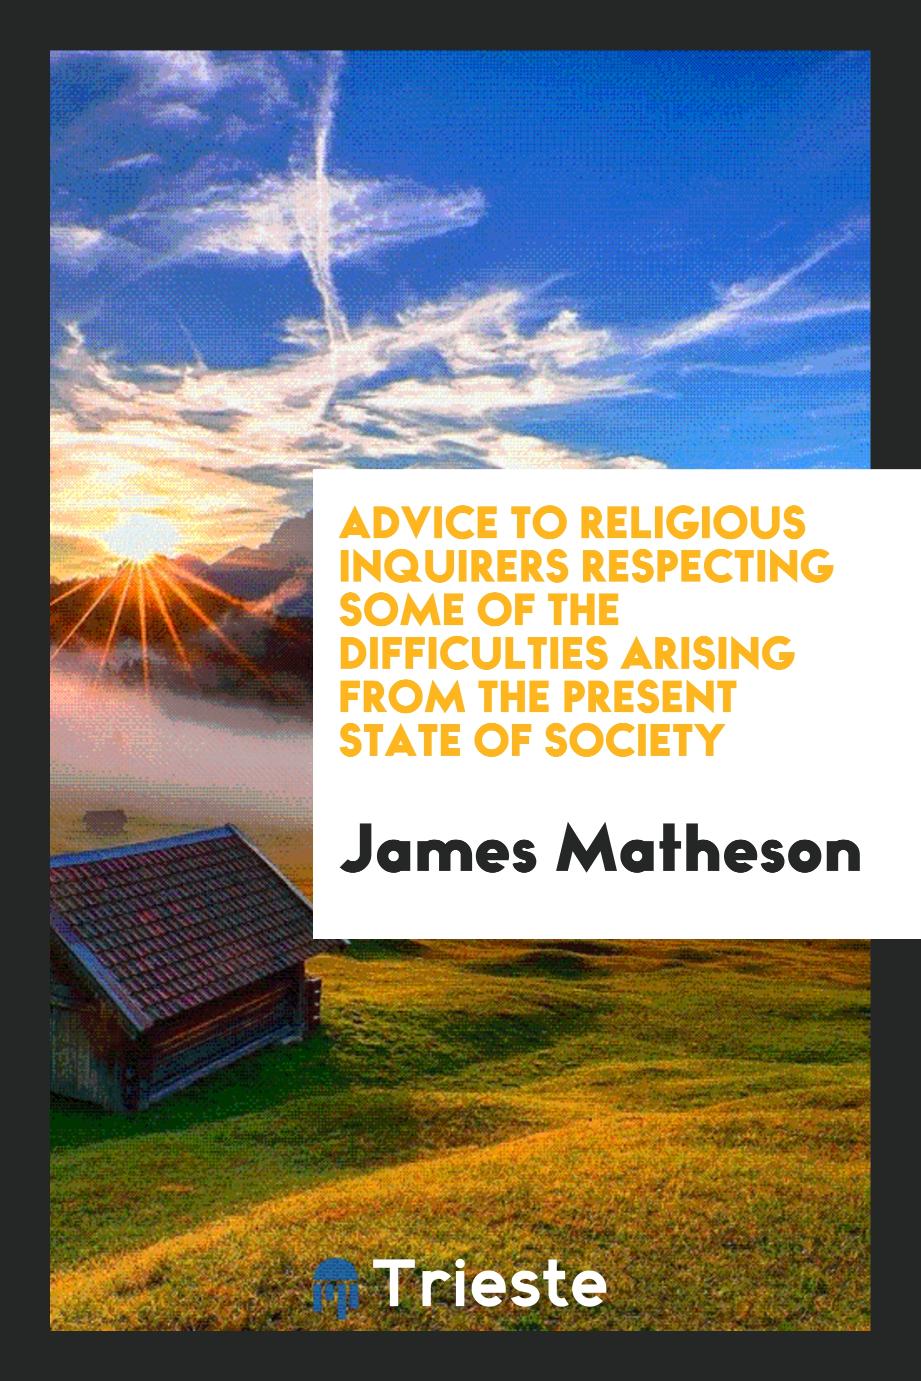 Advice to religious inquirers respecting some of the difficulties arising from the present state of society